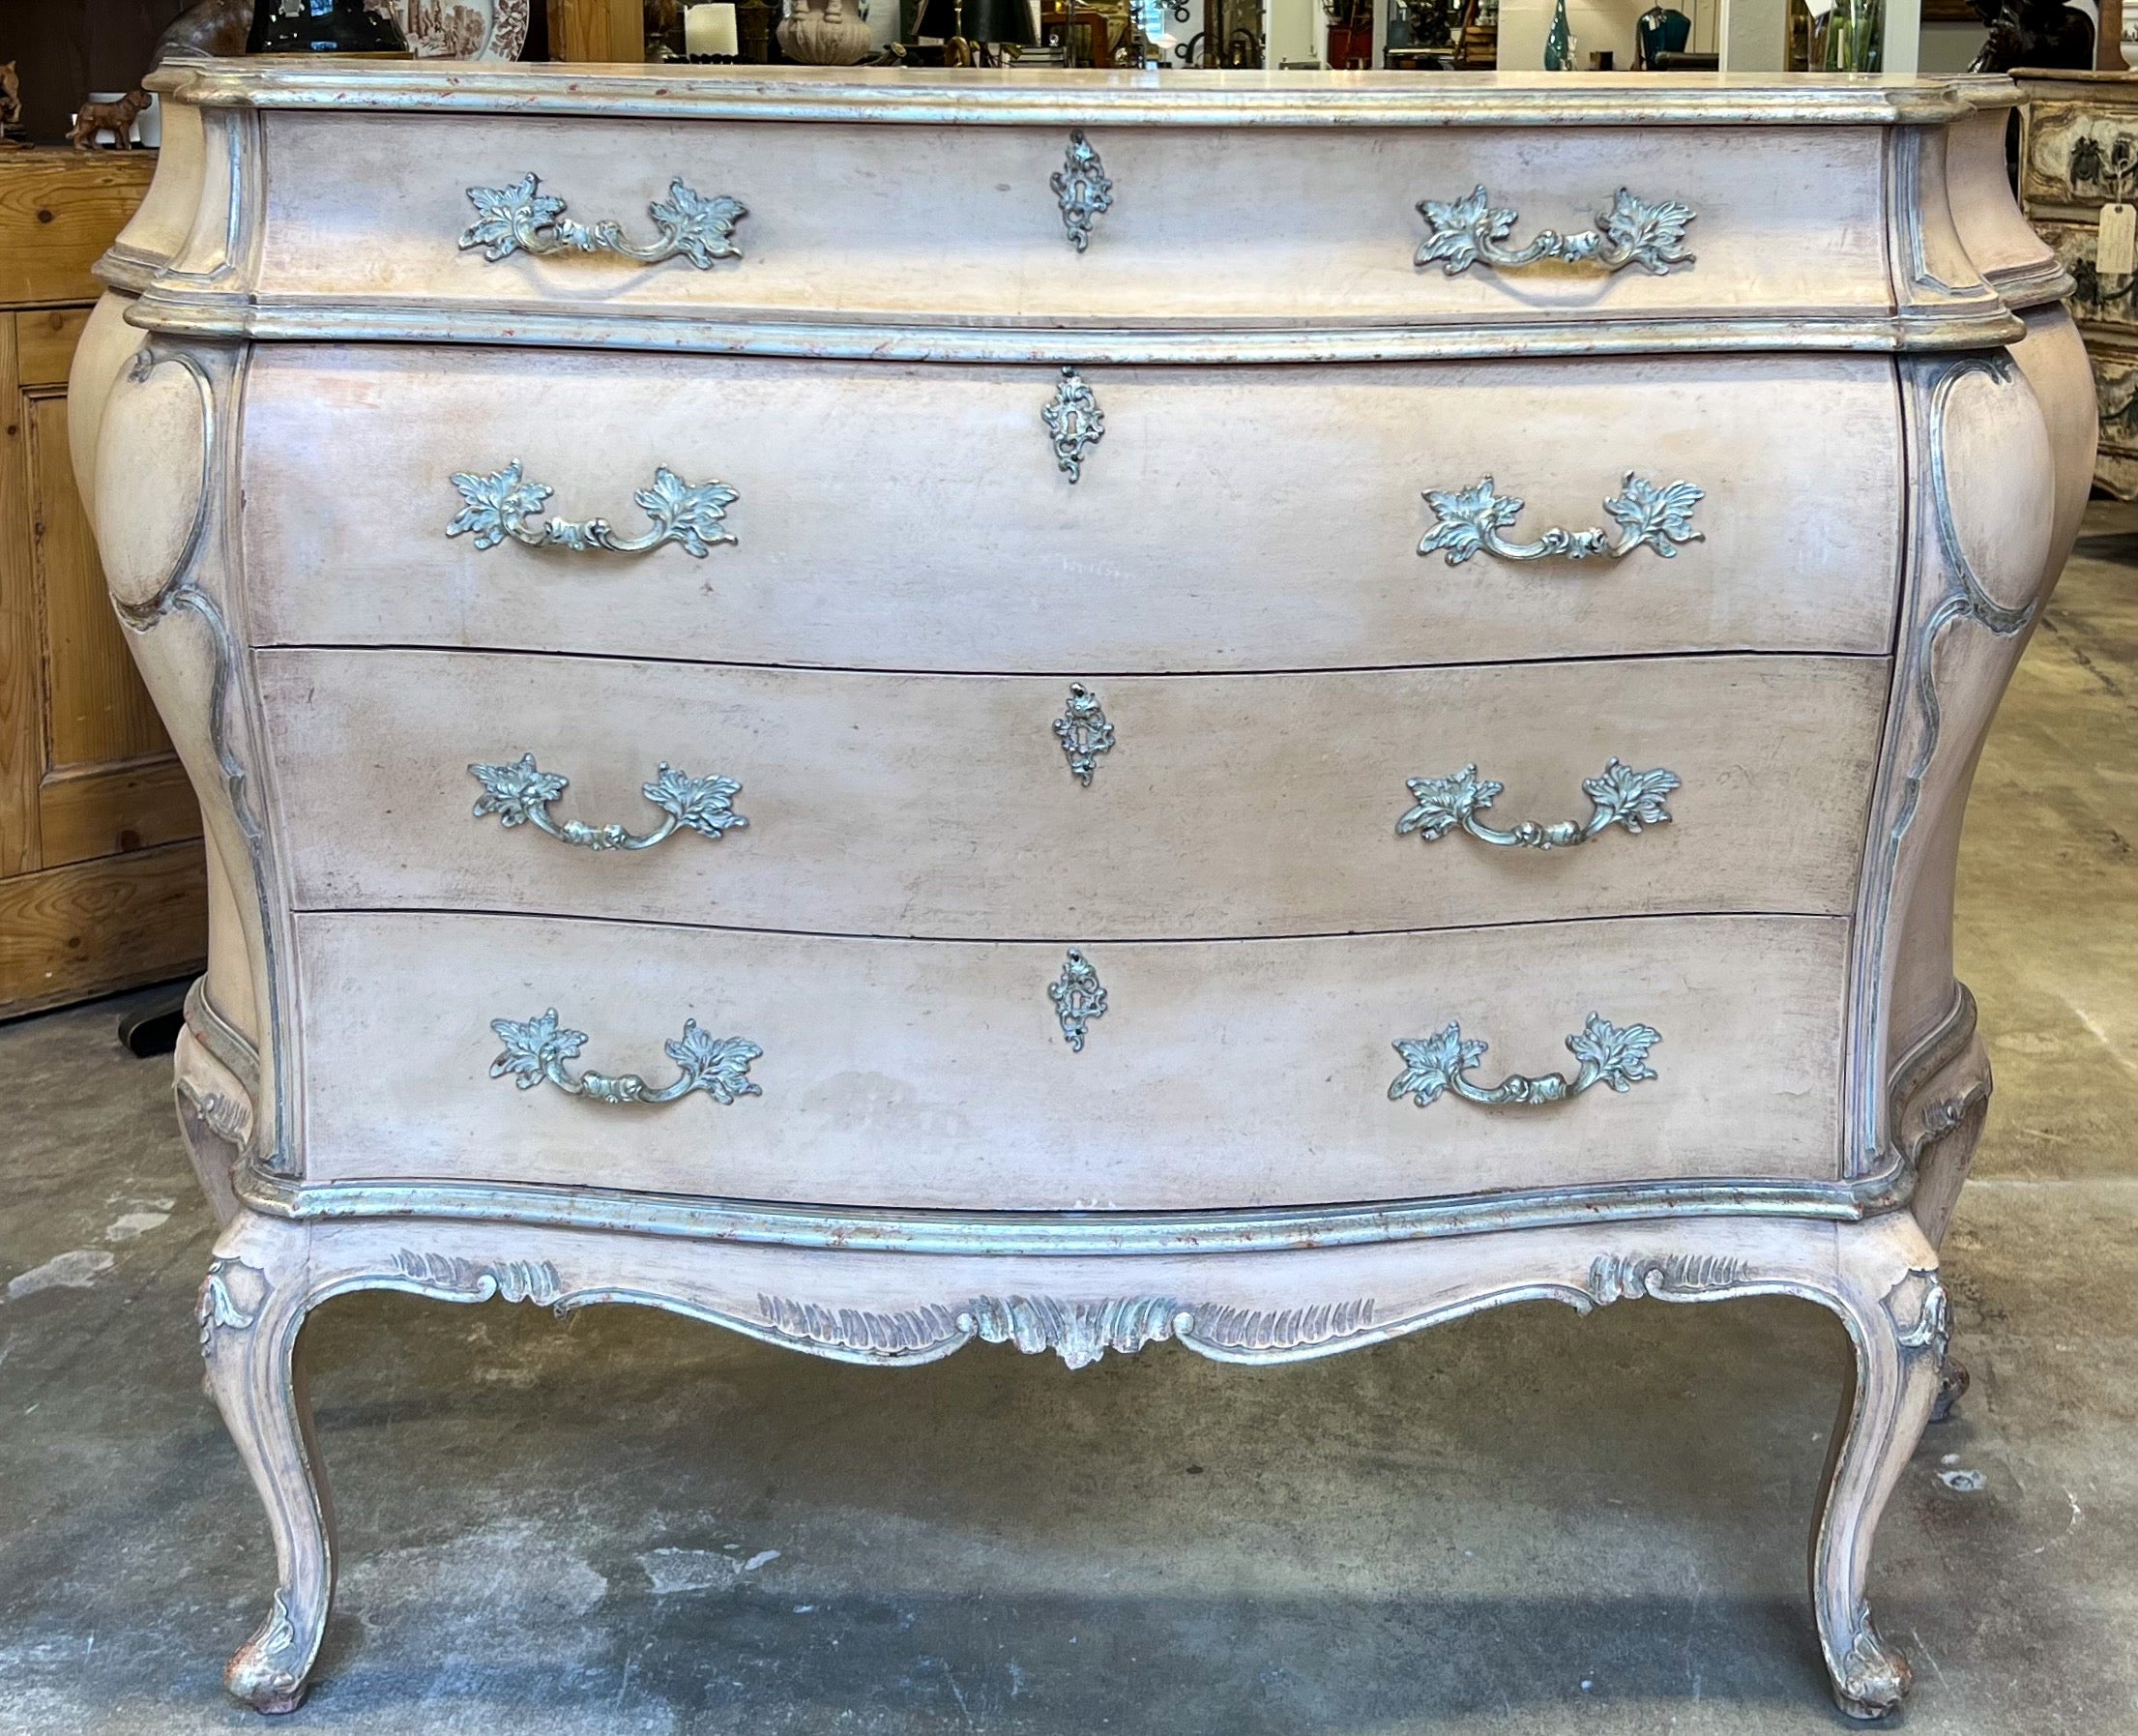 This is a lovely French Louis XV style painted commode with the original painted finish in a combination of a blush pink and silver gilt. When I first analyzed this piece, I was thinking it would be Italian, but its construction and weight has